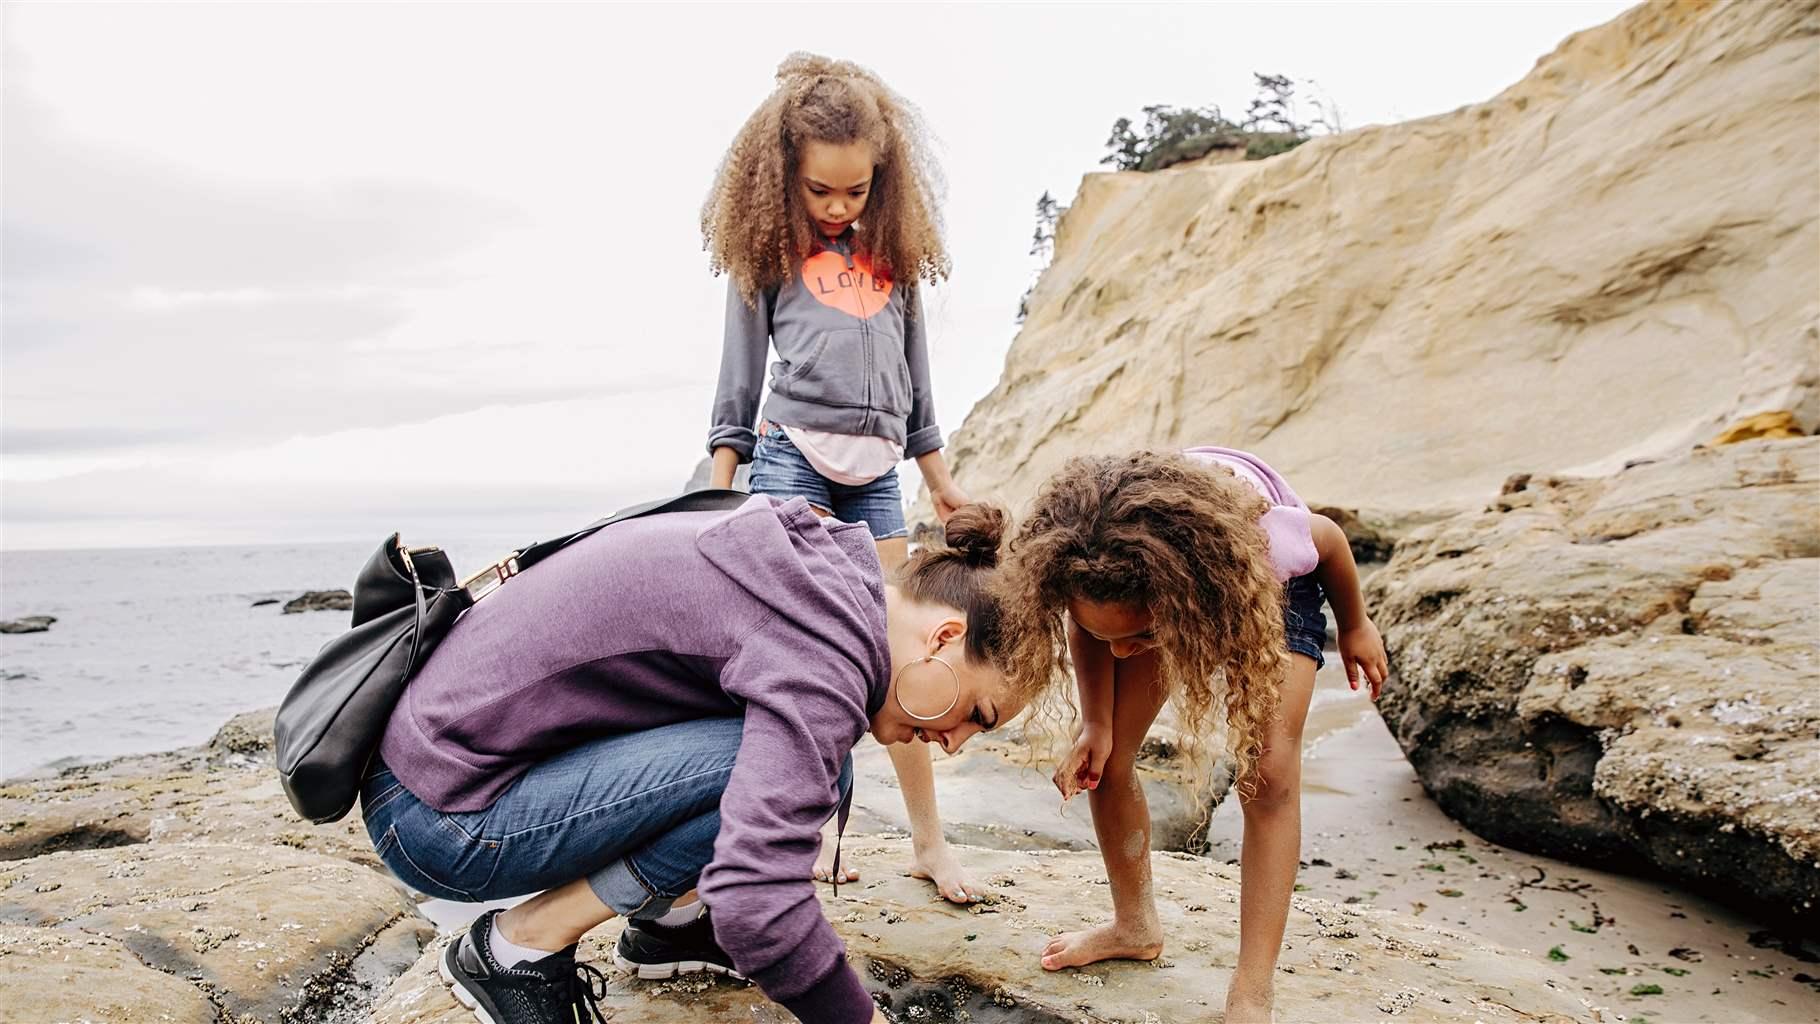 Beachgoers explore one of Oregon’s numerous tide pools—dynamic intertidal habitats where visitors can see marine life up close. 